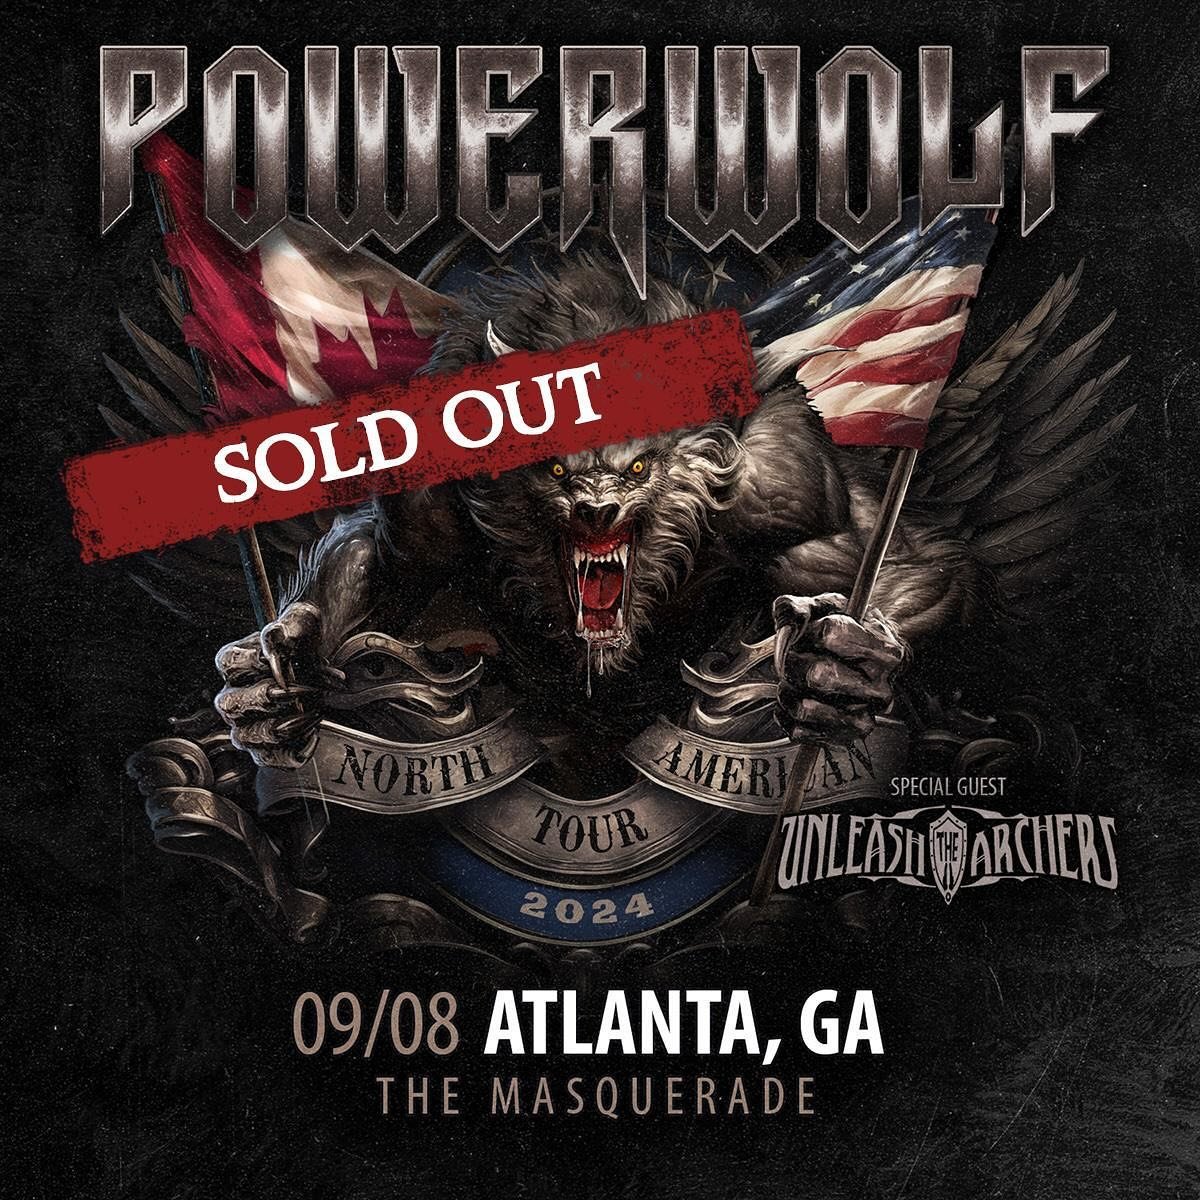 ATLANTA!!! Of course you were the first to sell out ❤️ Thanks so much to you all for getting your tickets early, we absolutely cannot wait to come back and play for you this September with Powerwolf!!! 
For anyone else thinking about coming to one of